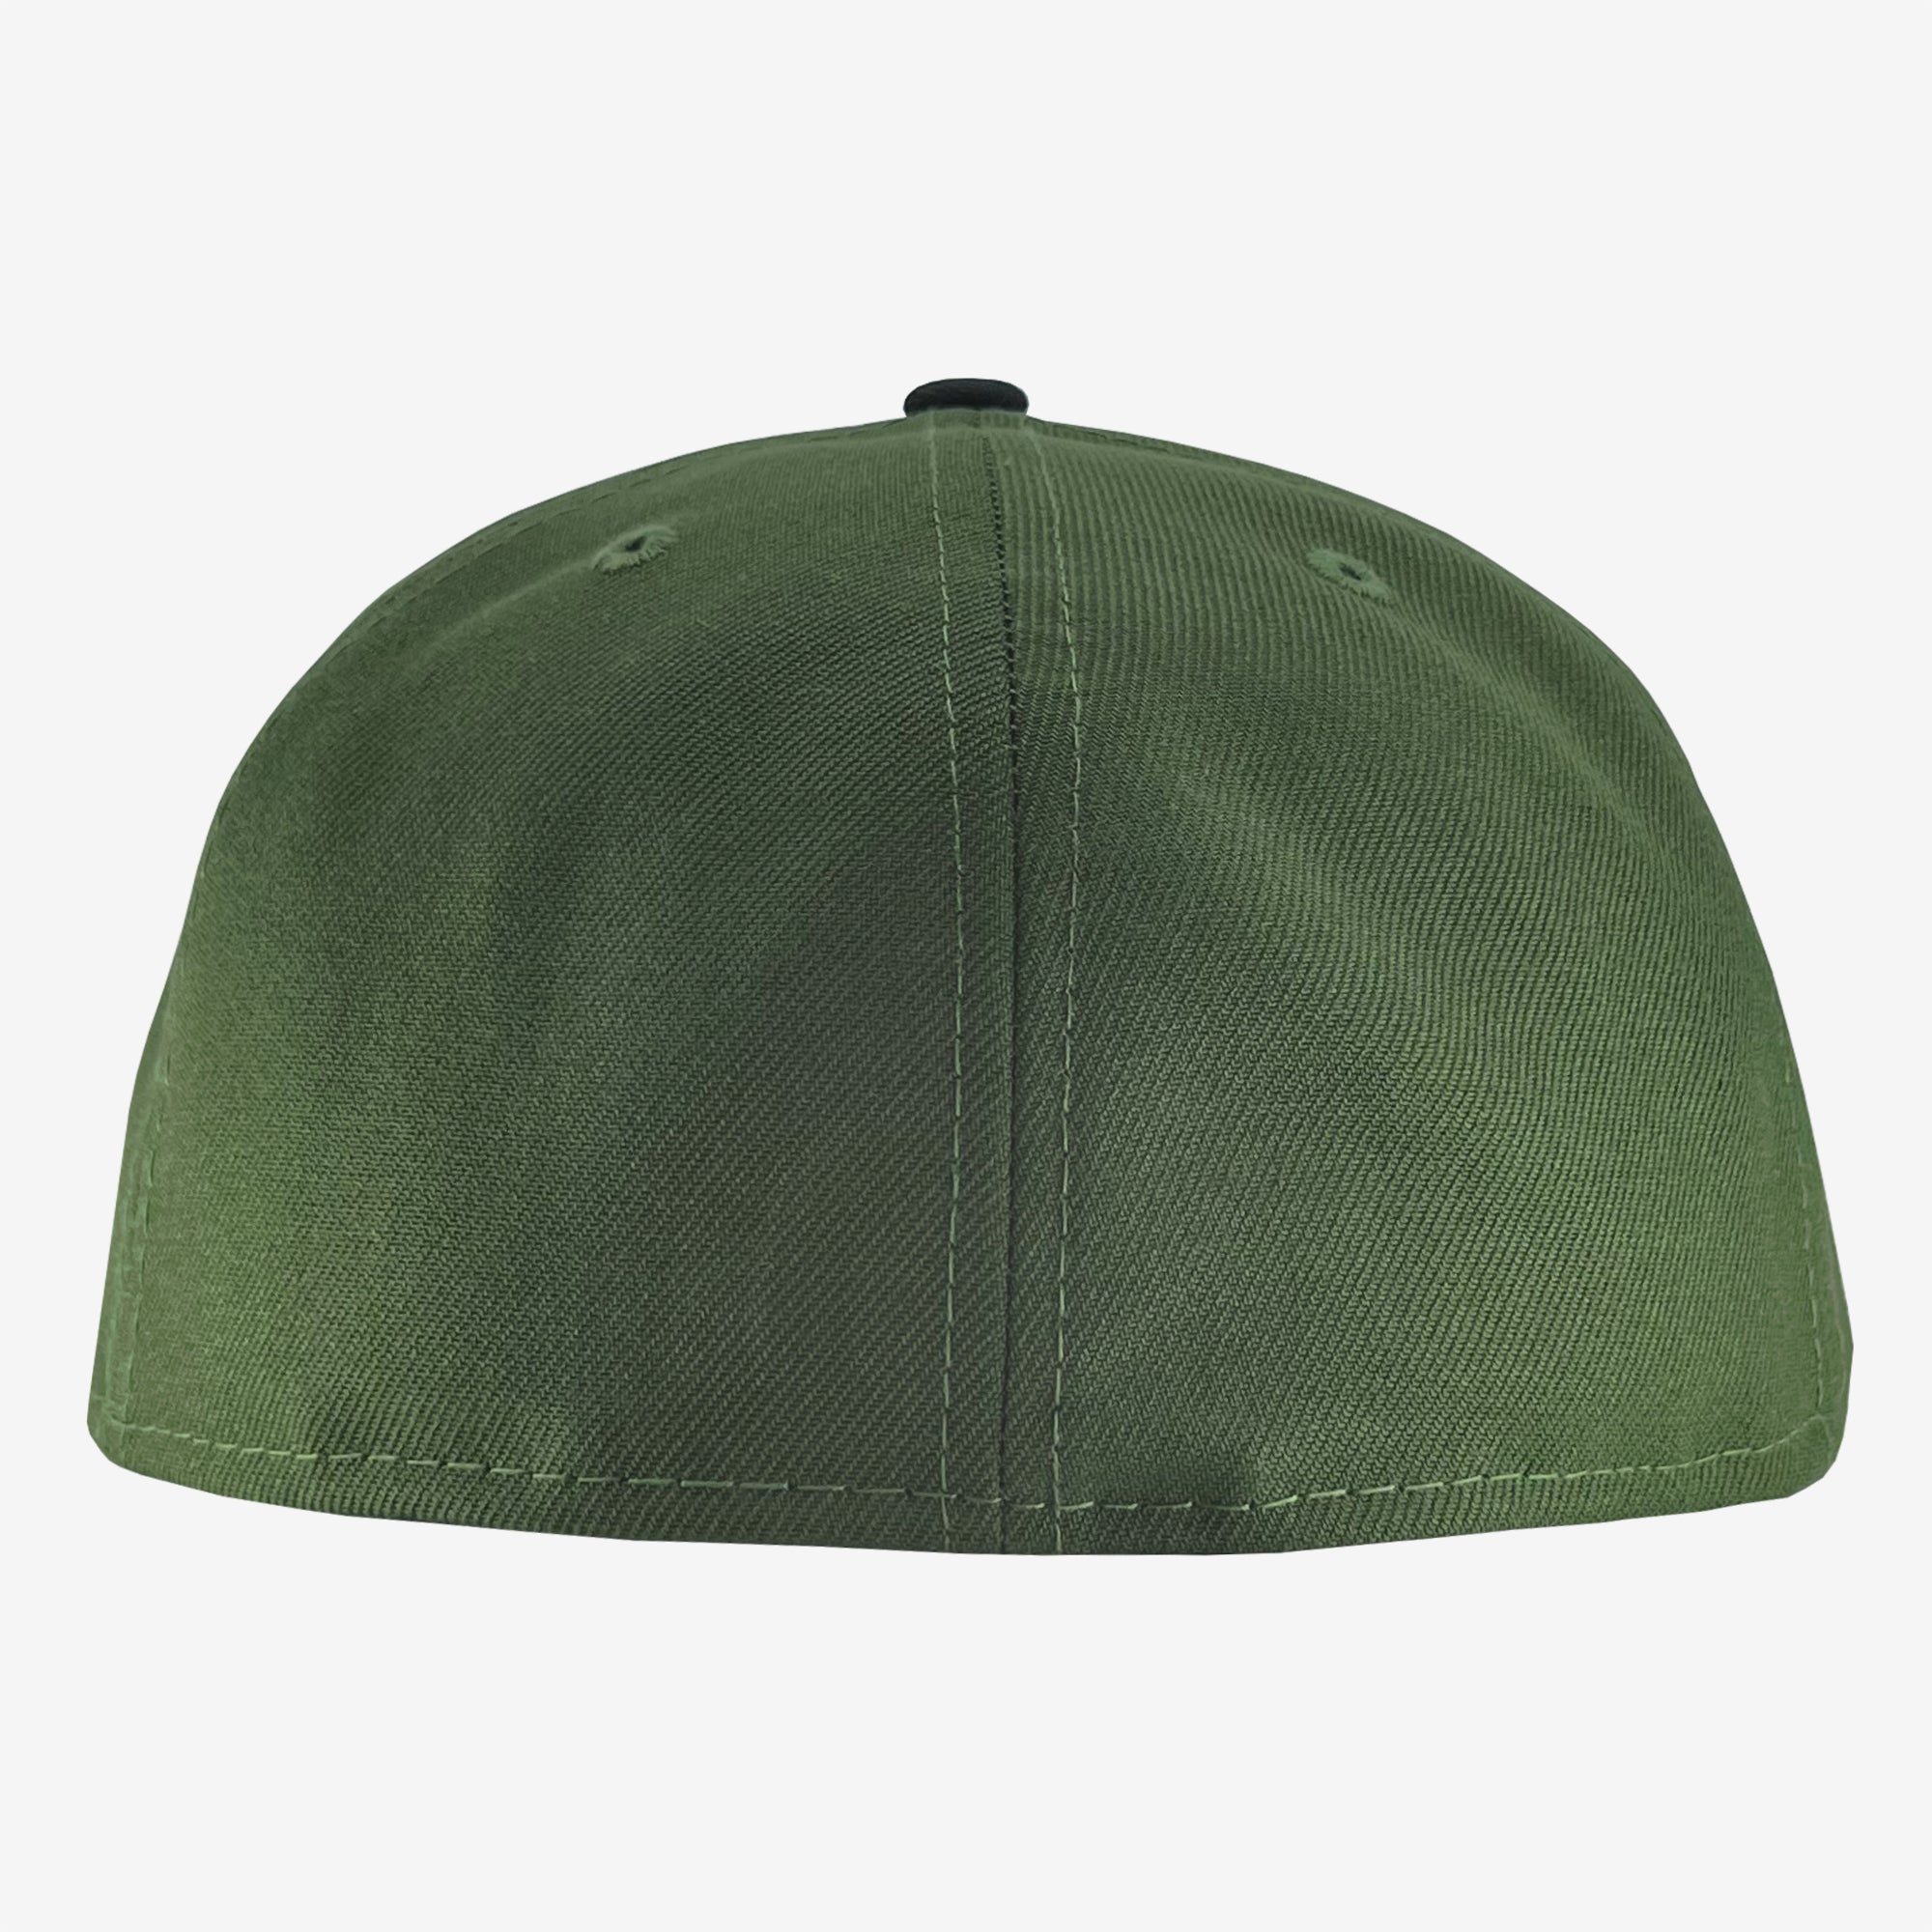 The backside of a green fitted cap. 